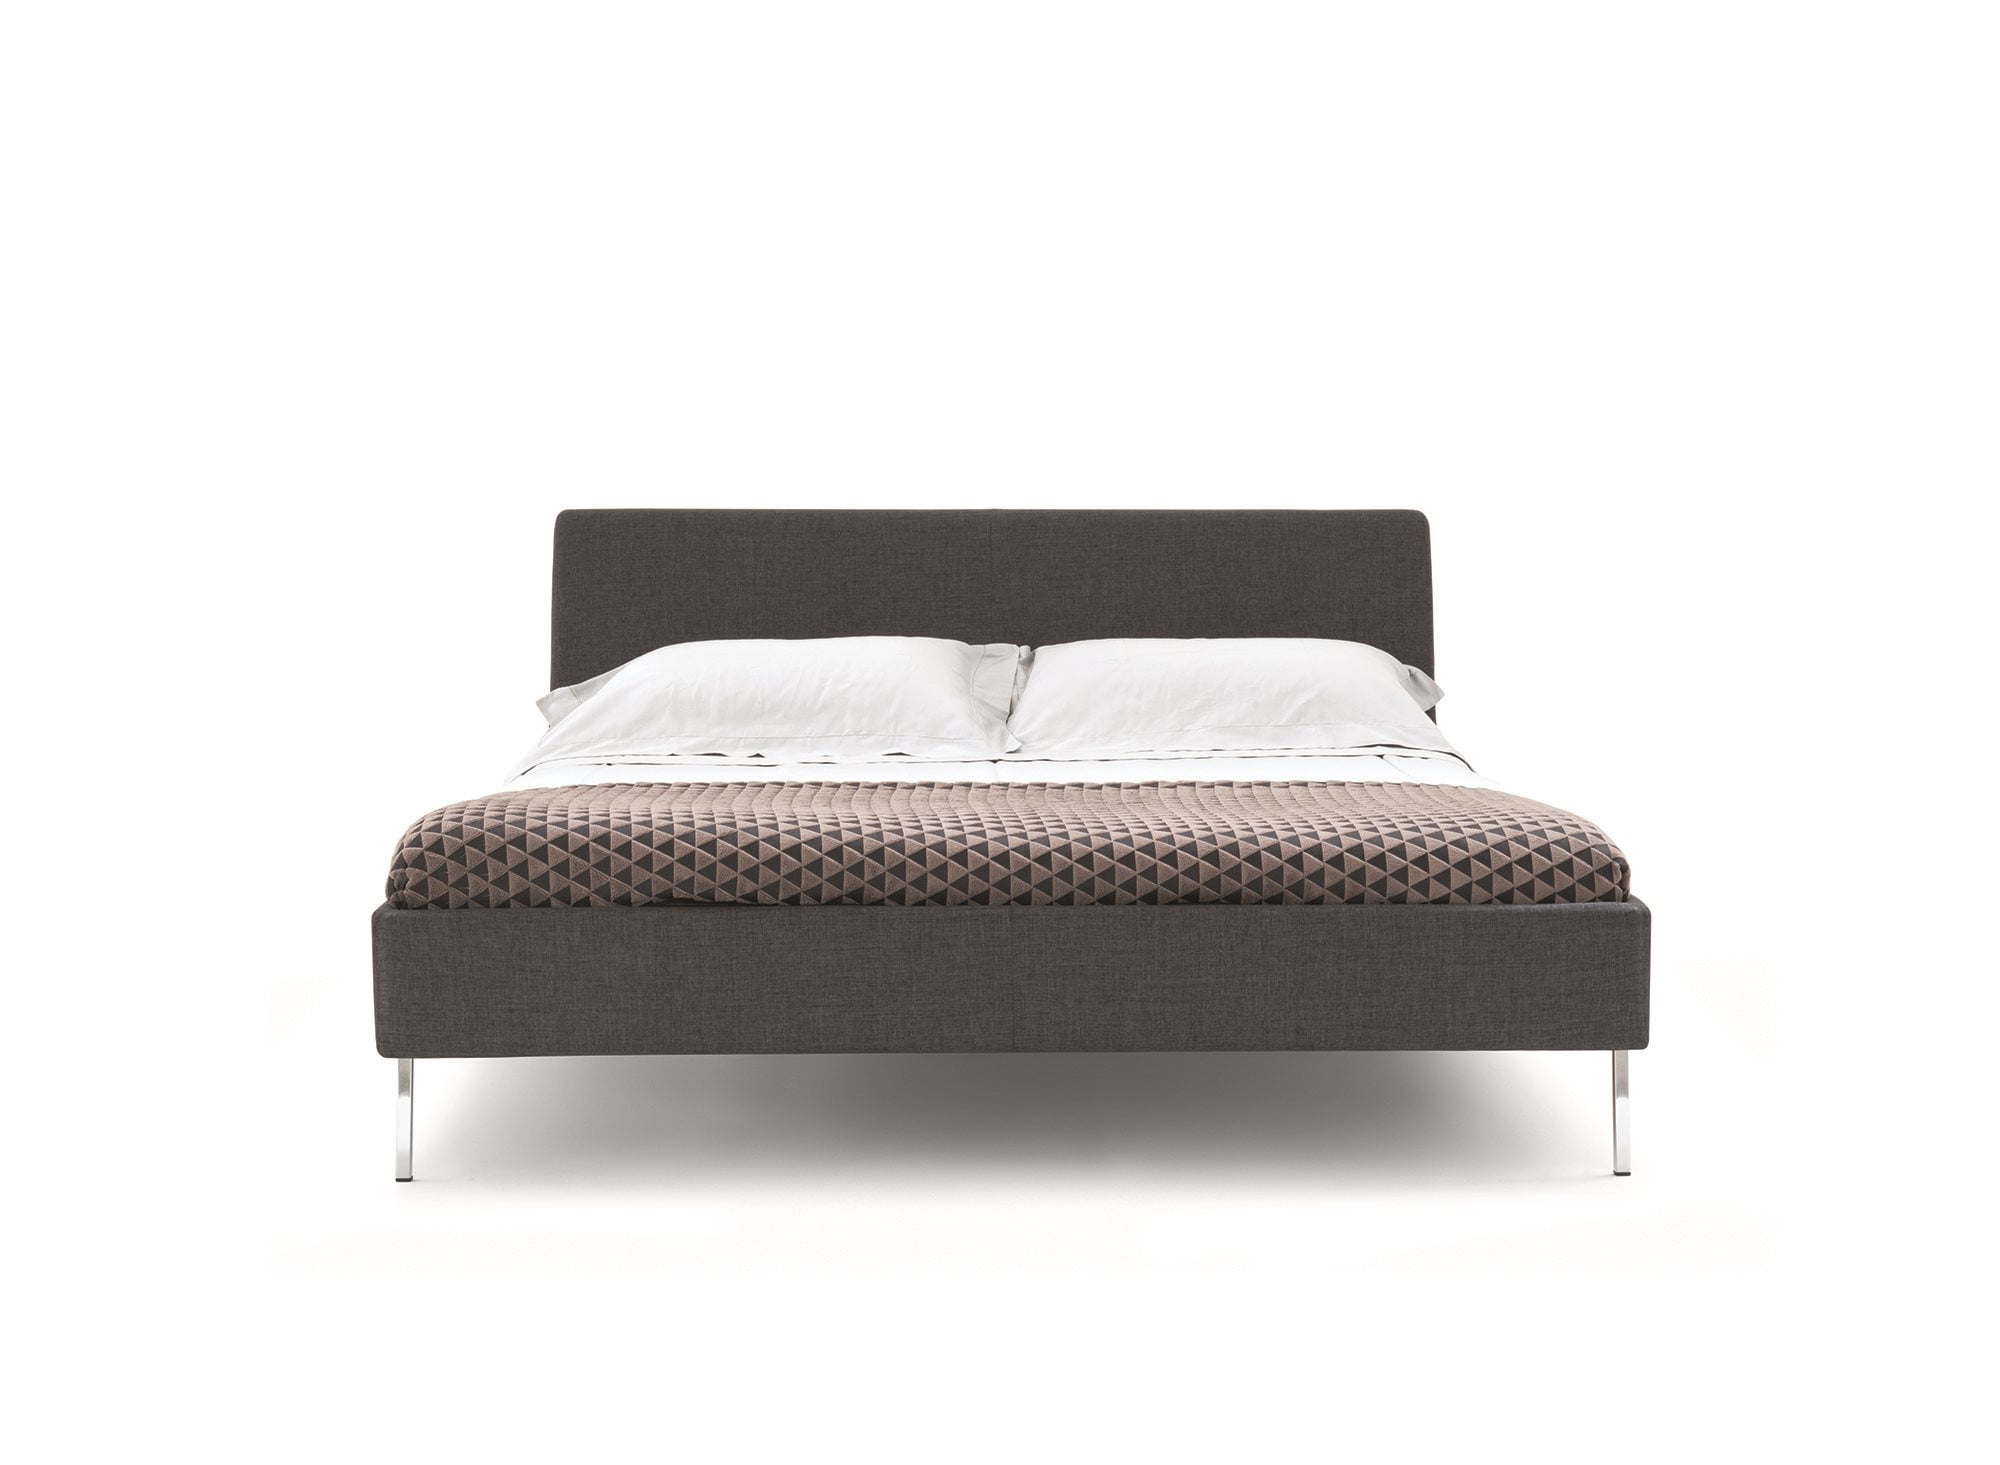 The clean lines and minimalist style of the Modern Luxe Bed create an effortless look that is both modern and timeless.